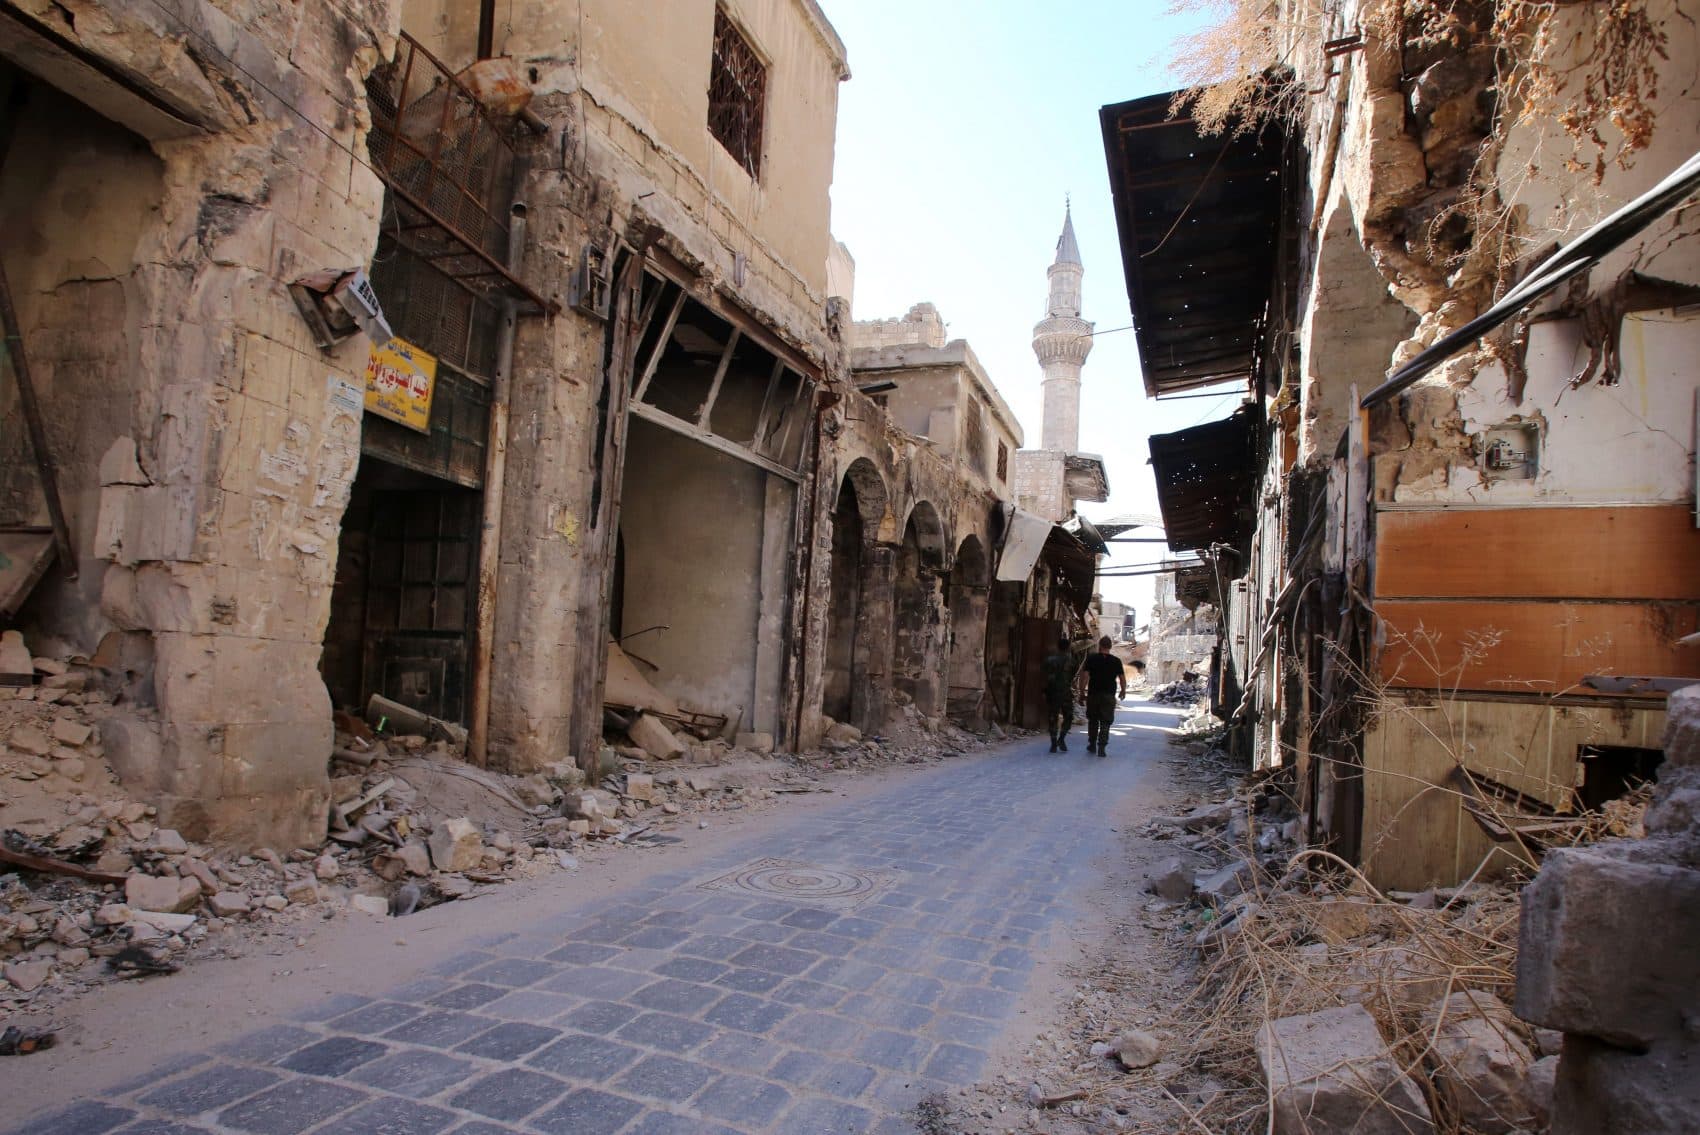 Syrian government soldiers walk in the damaged al-Farafira souk in the government-held side of Aleppo's historic city center on Sept. 16, 2016. (Youssef Karwashan/AFP/Getty Images)